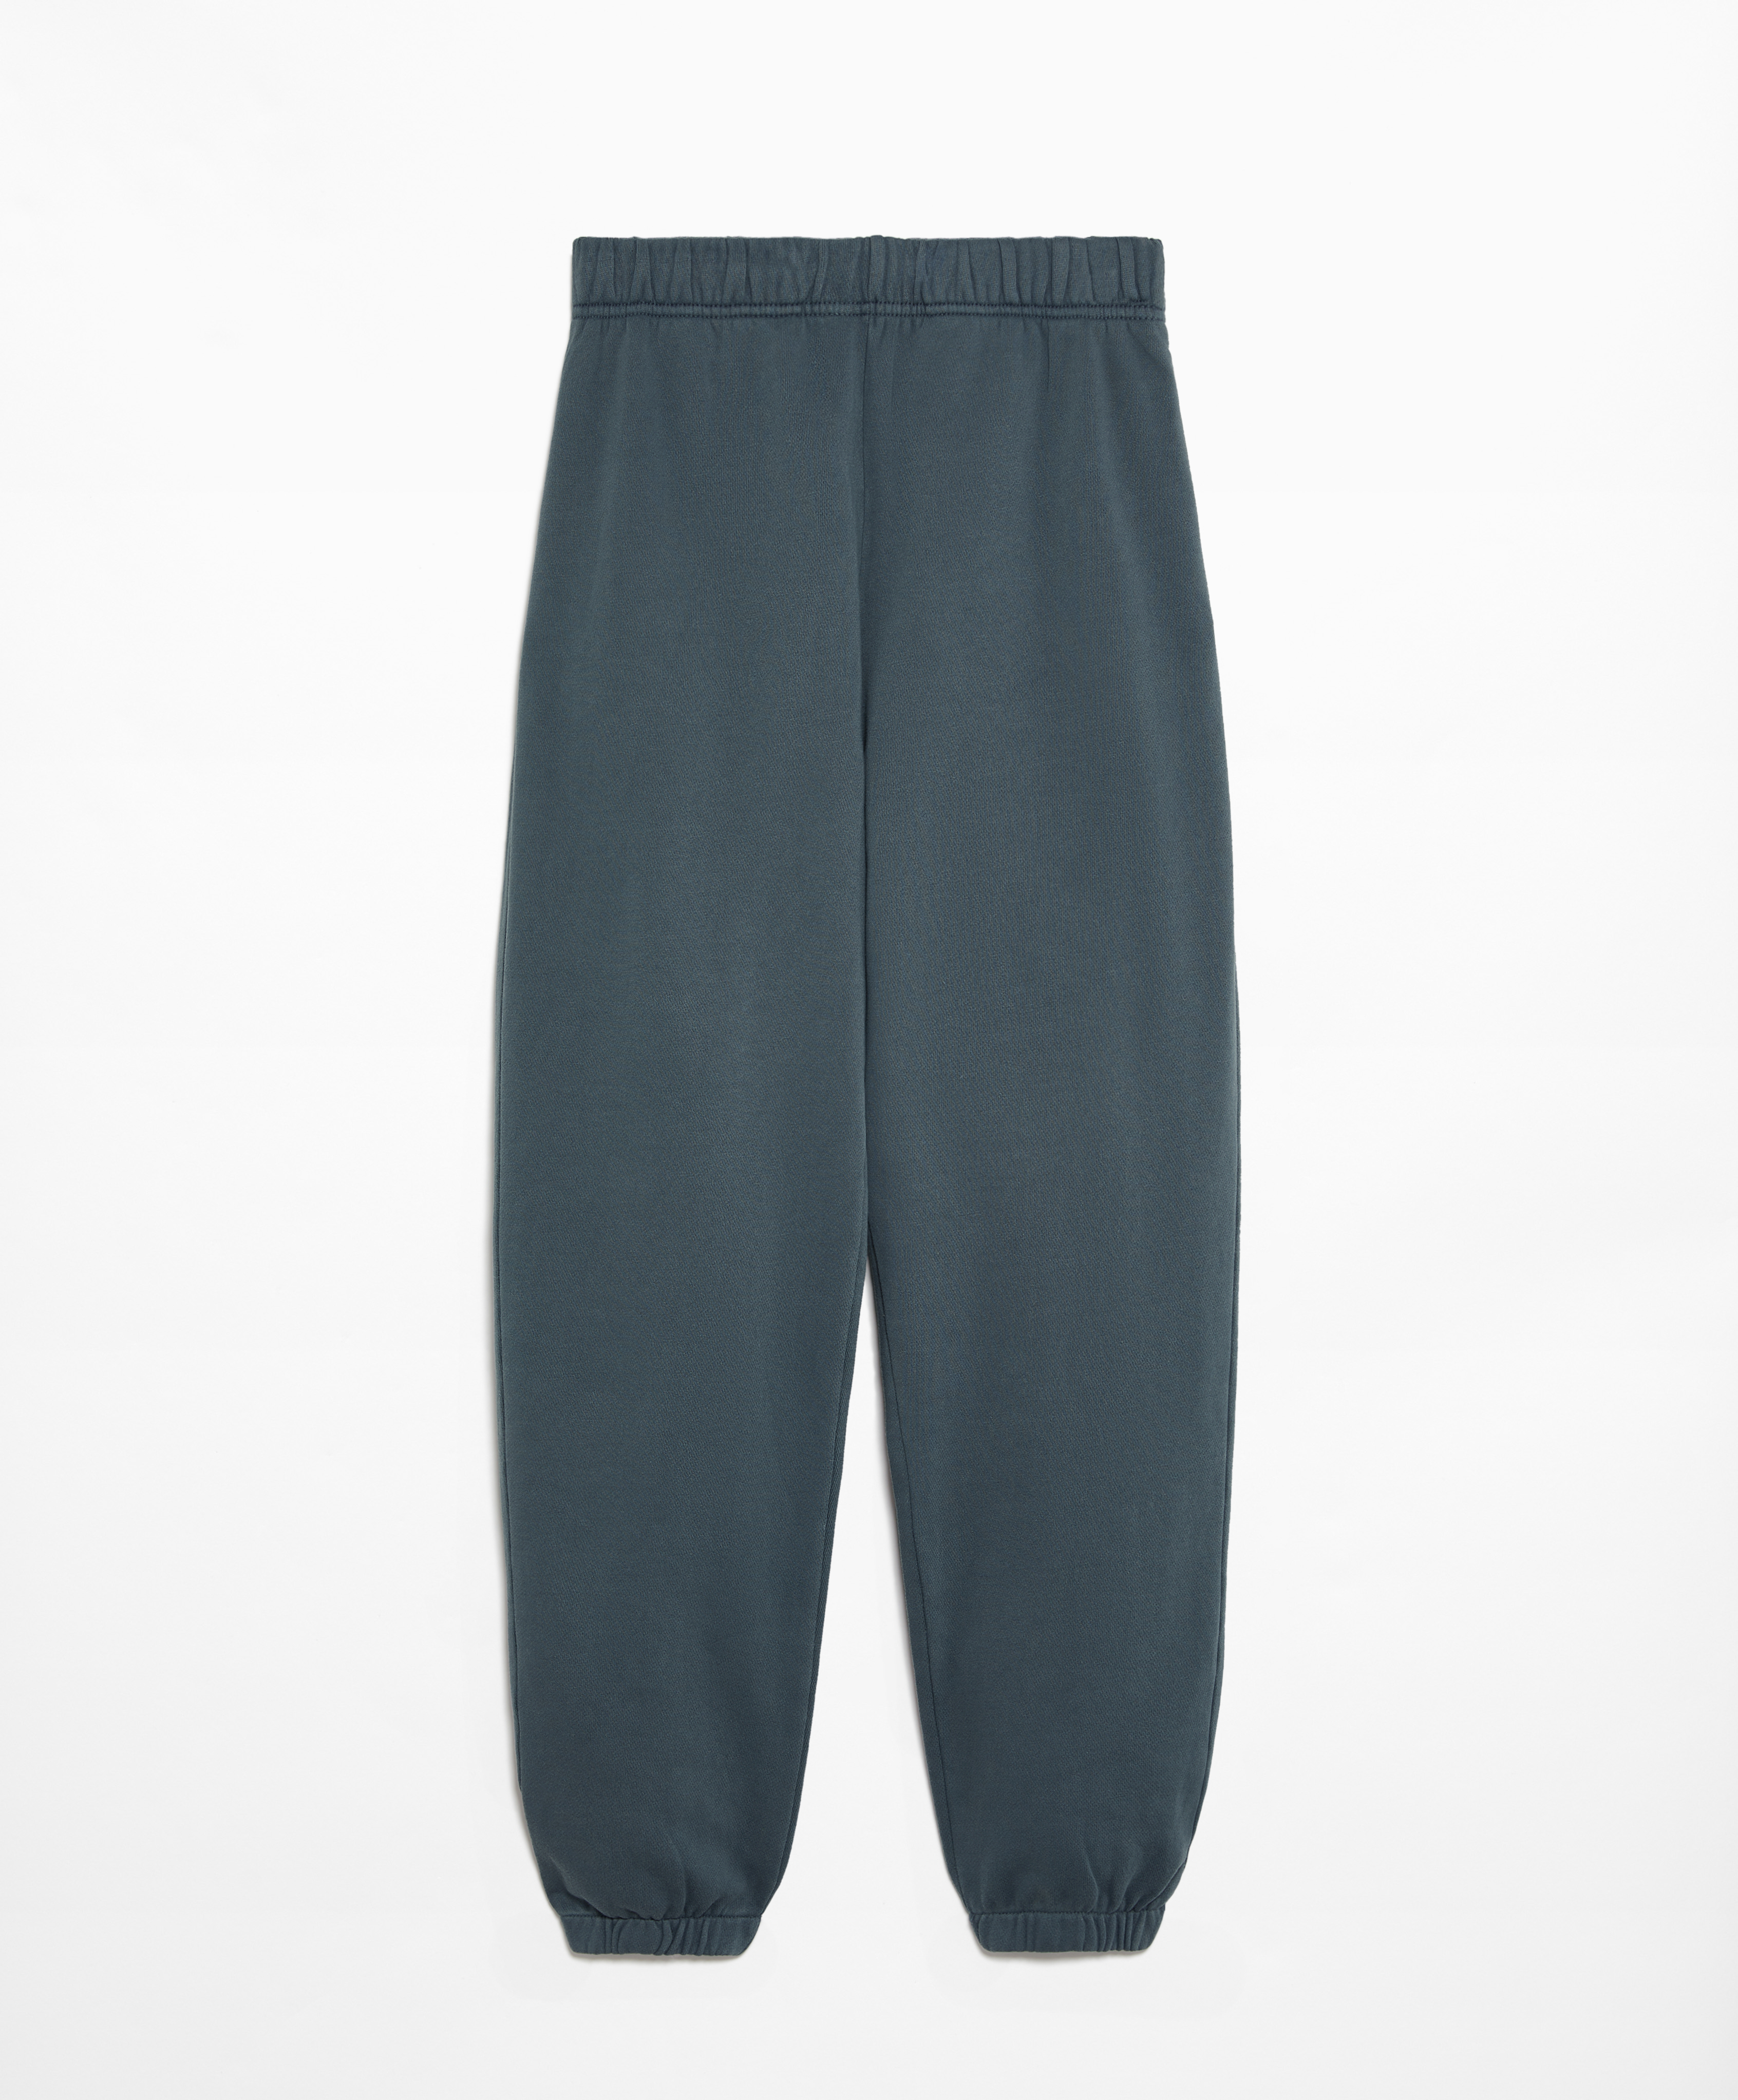 Relaxed washed cotton joggers